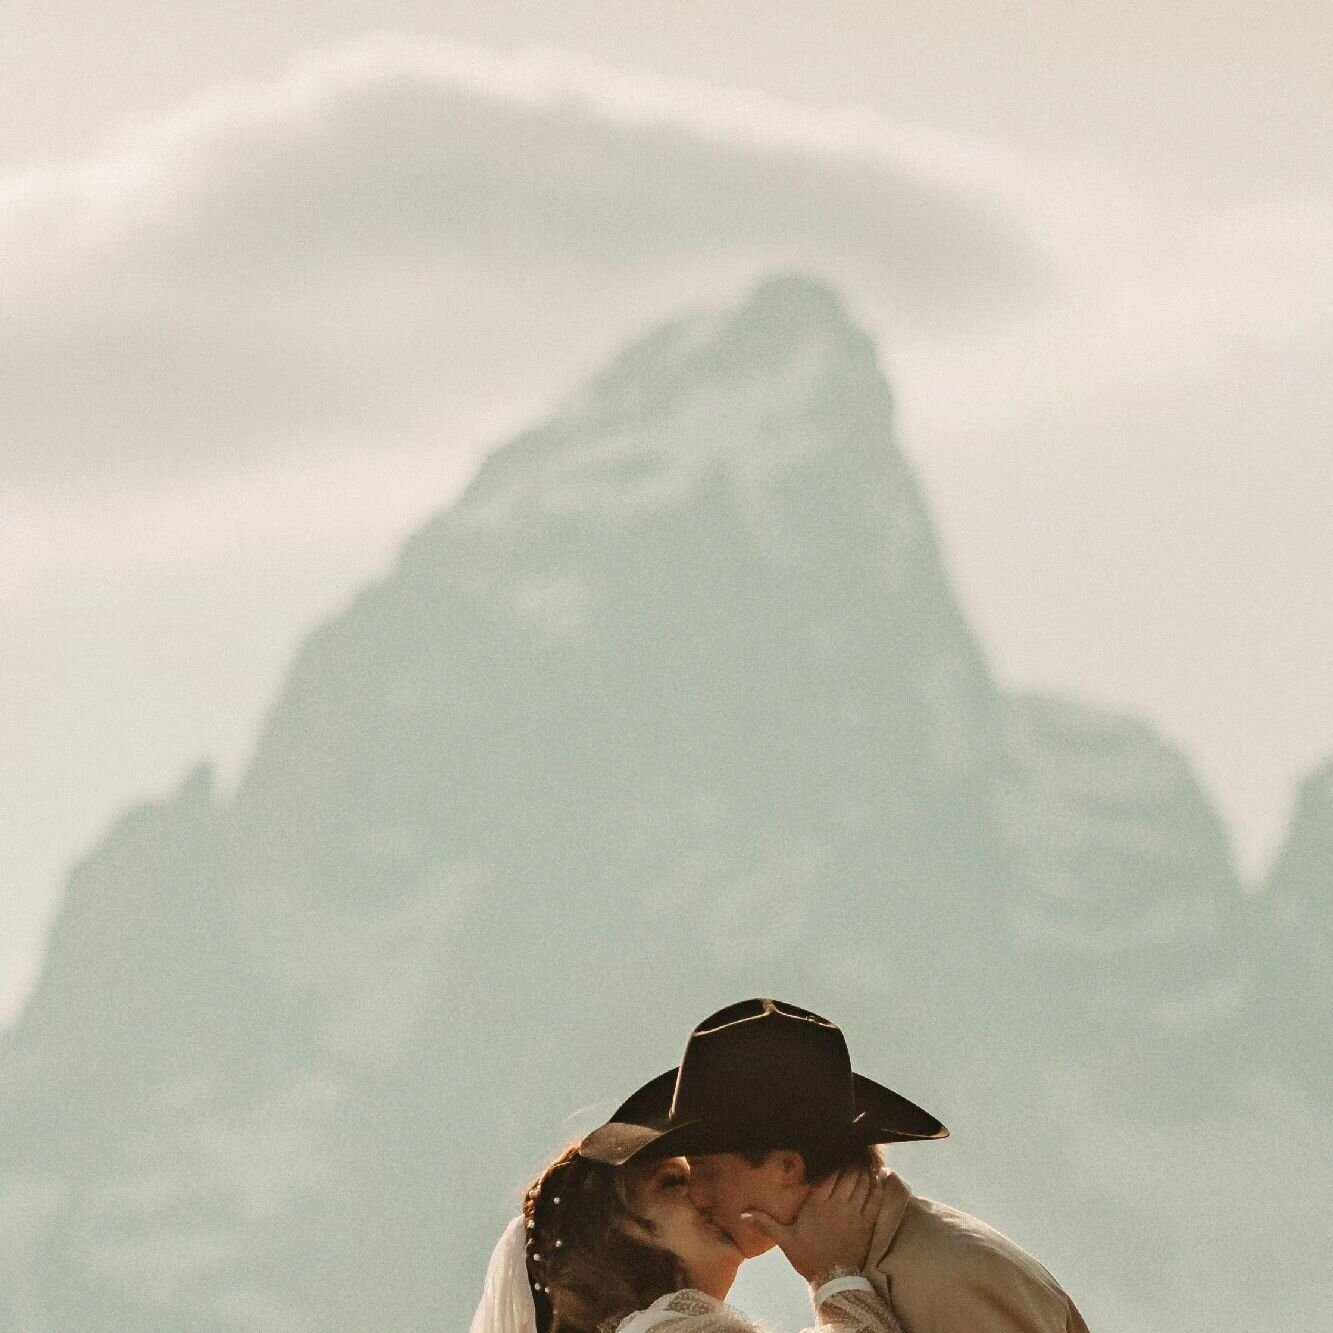 Where cowboys and the Tetons meet, the Wild West's spirit roams free.
Kinzie + Jacob are rodeo stars native to Jackson, WY. Their July day interview Tetons was a dream.
#jacksonhole #westernwedding